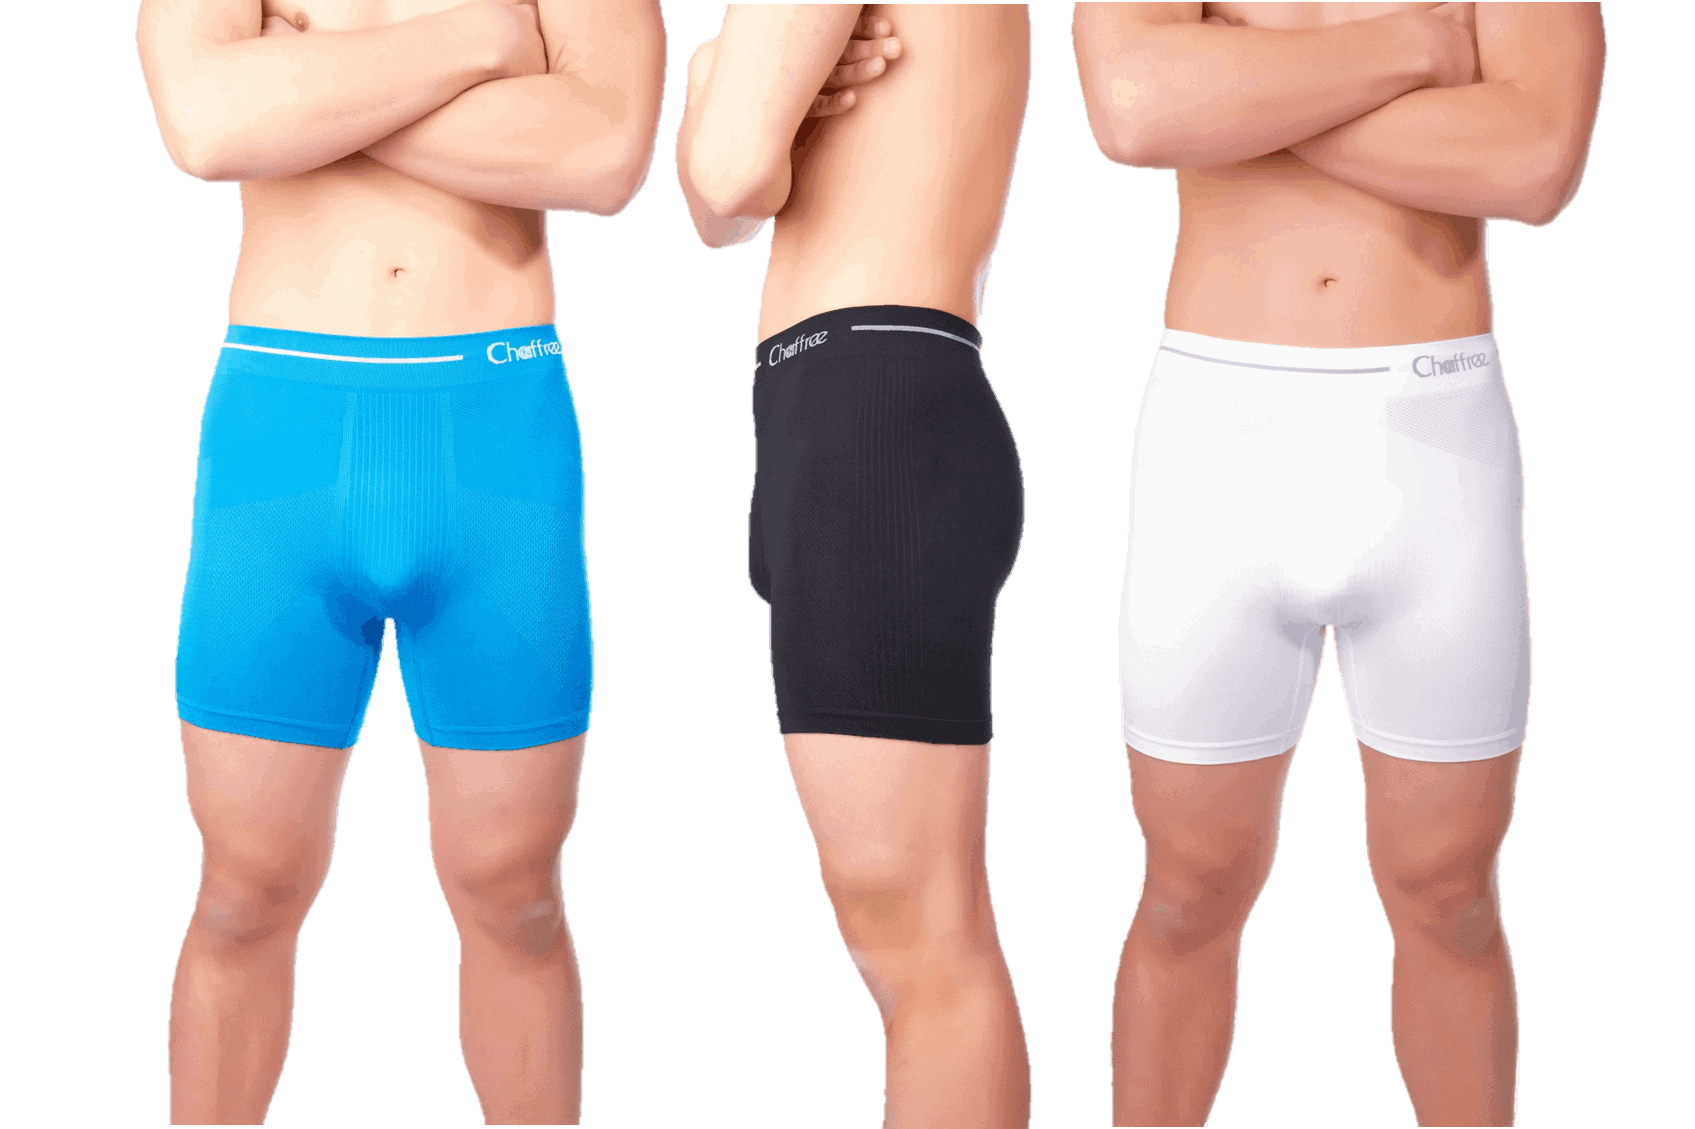 Stretchy Seamless Sports Gym Exercise Underwear 5 Pack Short & Long Leg Chaffree Mens Briefs Underpants Traditional High Waist Ultra Comfortable Pants Sweat and Chafing Control Moisture Wicking 